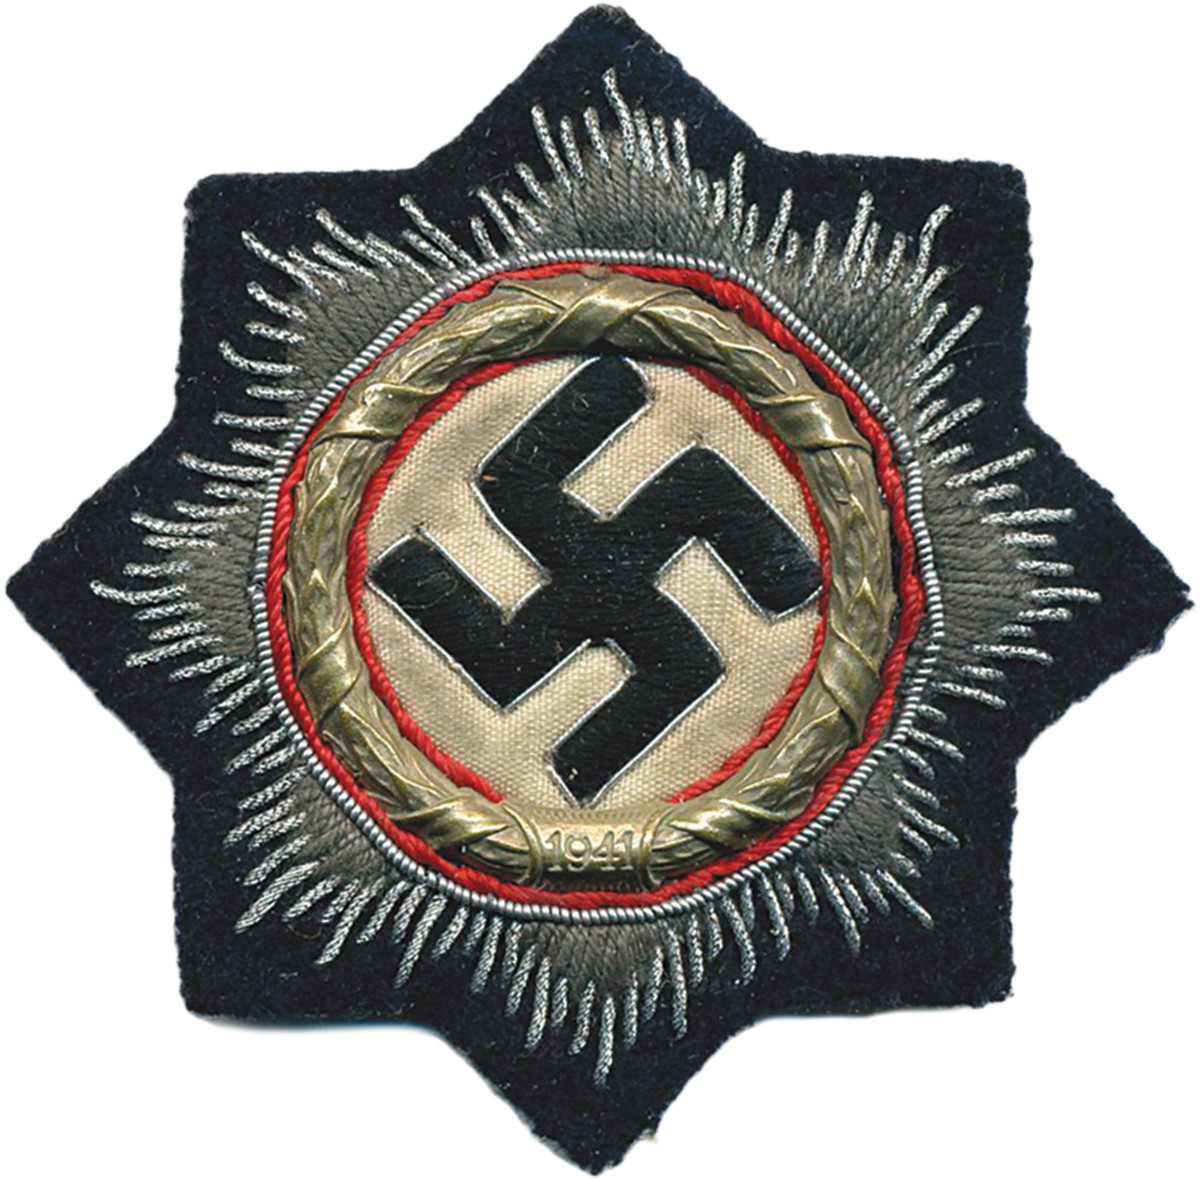 In addition to the two official metal versions, a cloth version for both grades was available with different cloth backgrounds, depending on the service branch of the bearer. The above German Cross in Silver with black cloth backing was for the Panzertruppe.